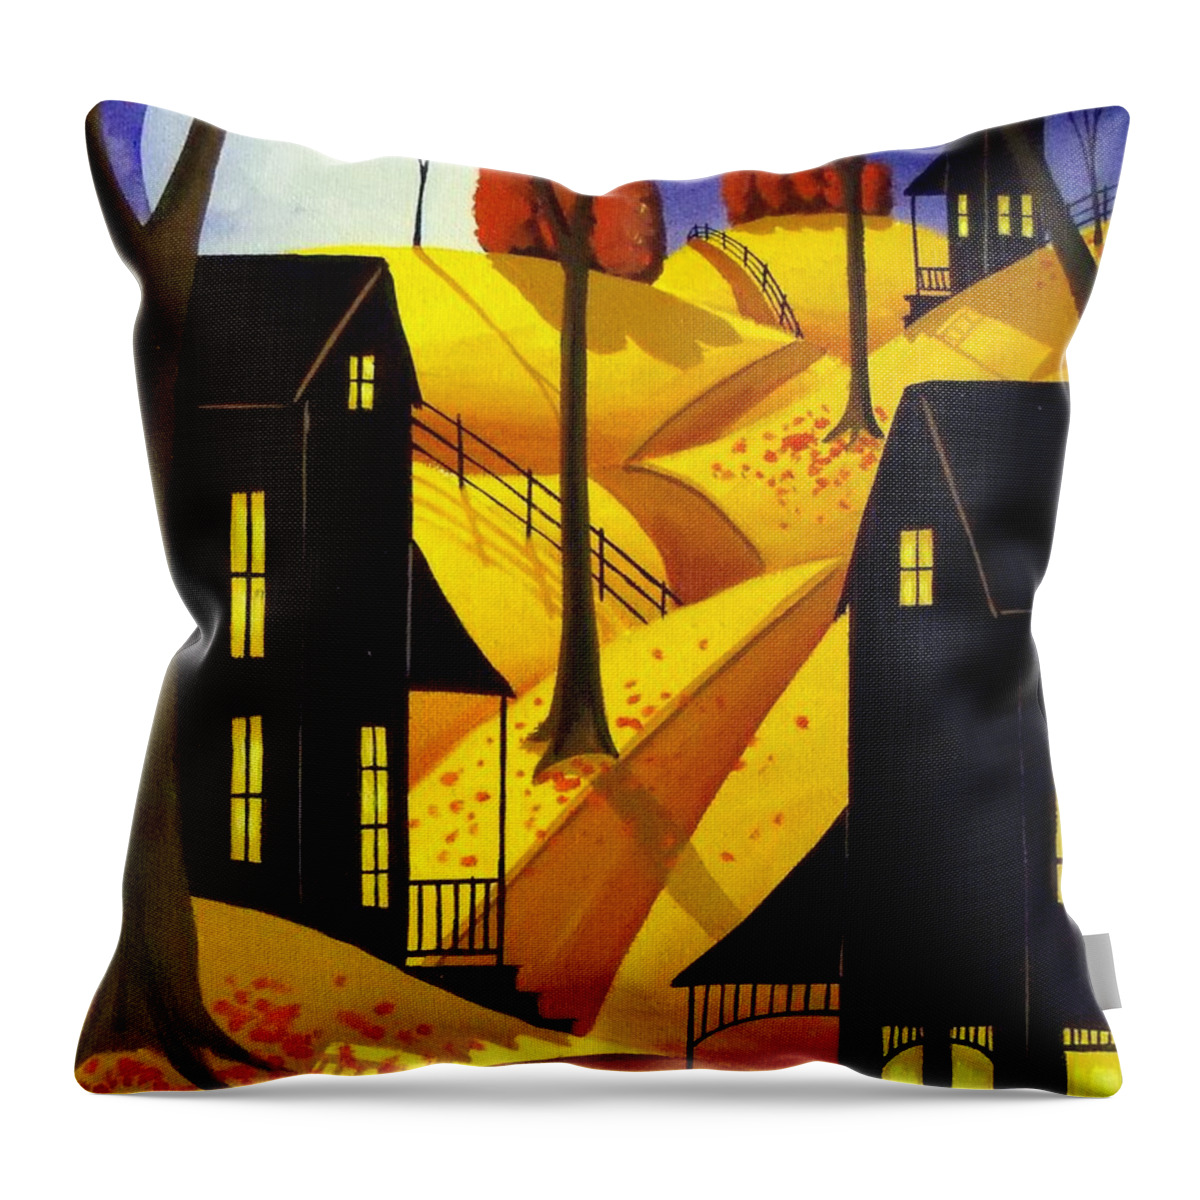 Folk Art Throw Pillow featuring the painting Porch Kitty - folk art landscape cat by Debbie Criswell